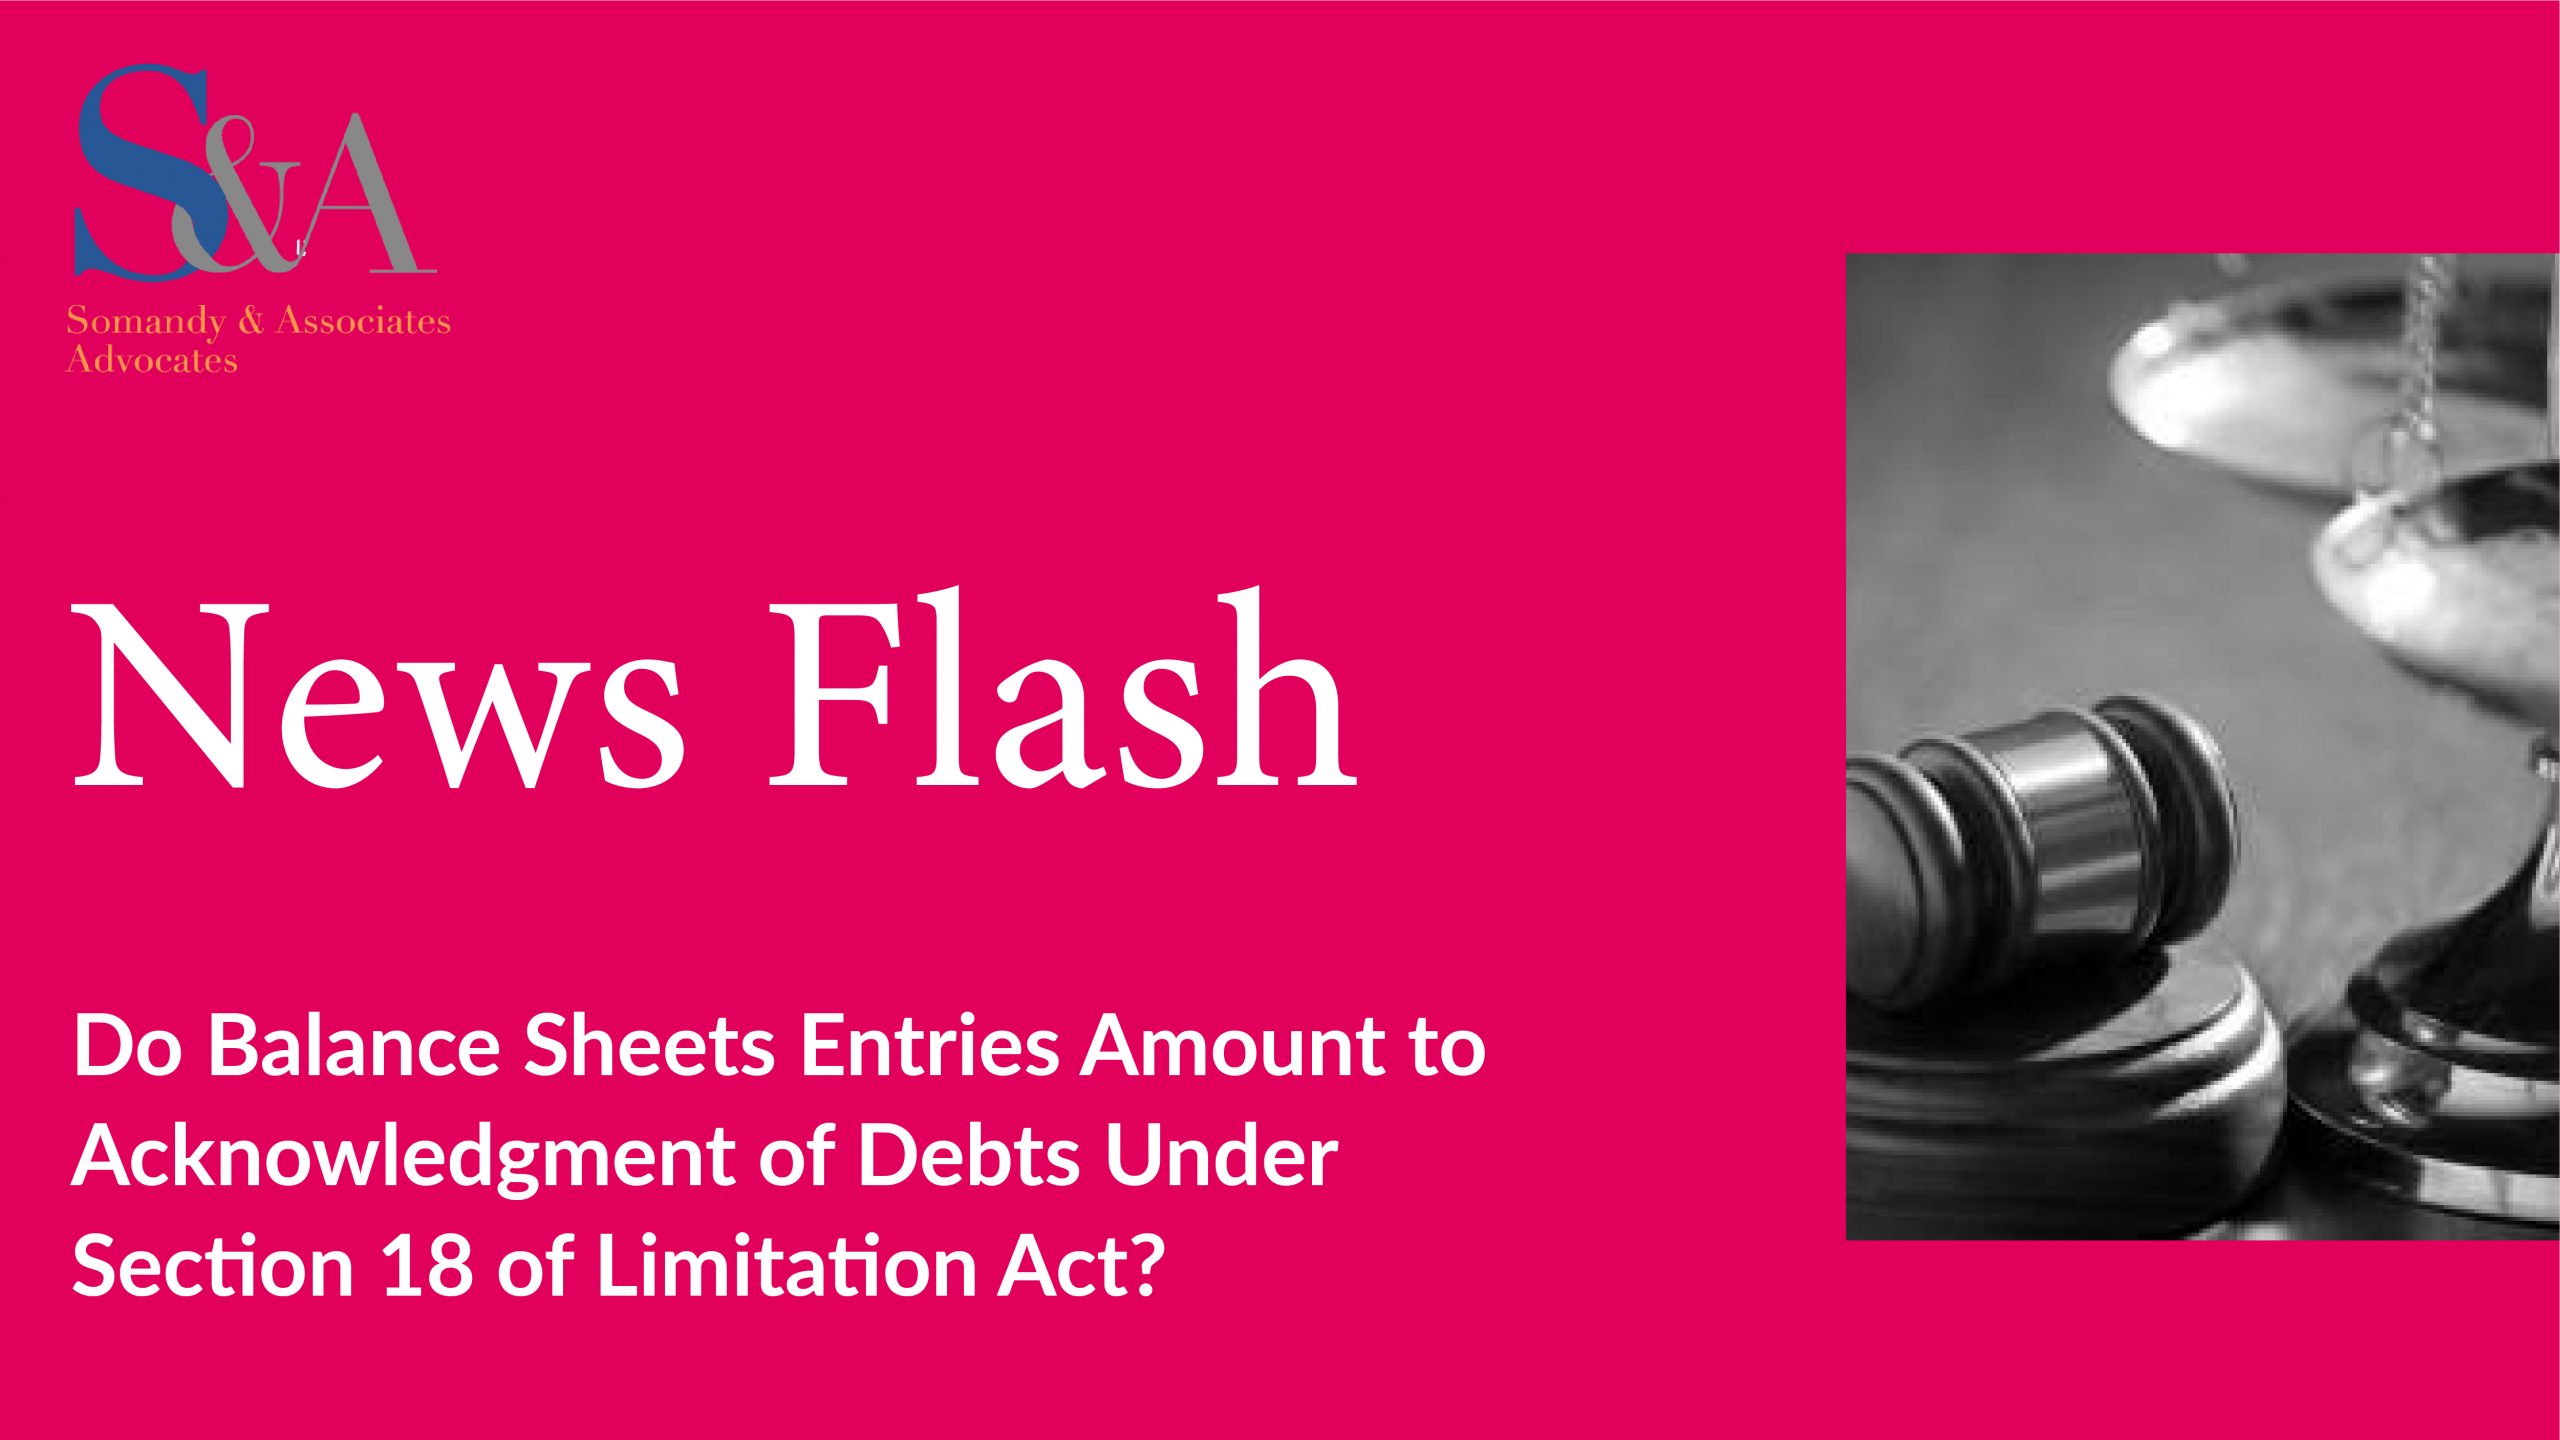 Do Balance Sheets Entries Amount to Acknowledgment of Debts Under Section 18 of Limitation Act?